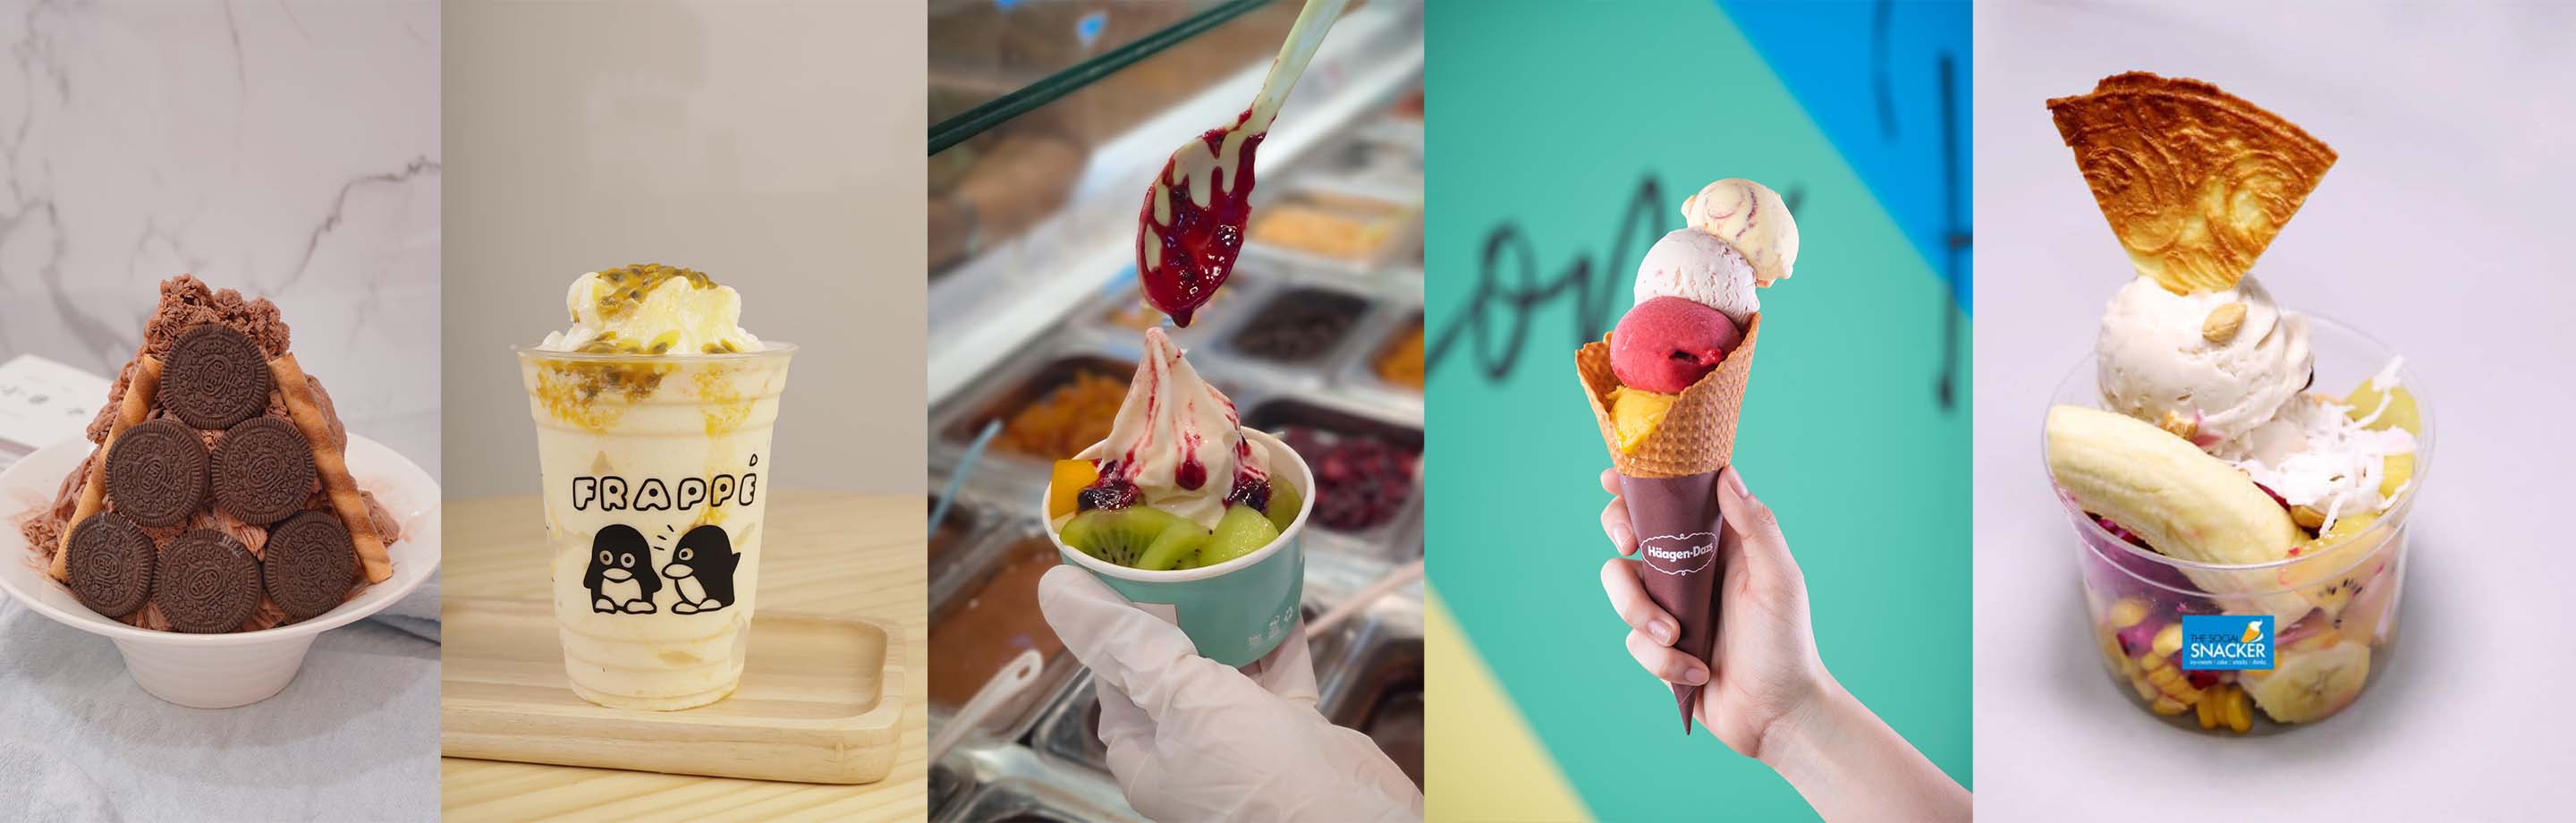 Discover these 8 ice cream shops to try before the end of the year 